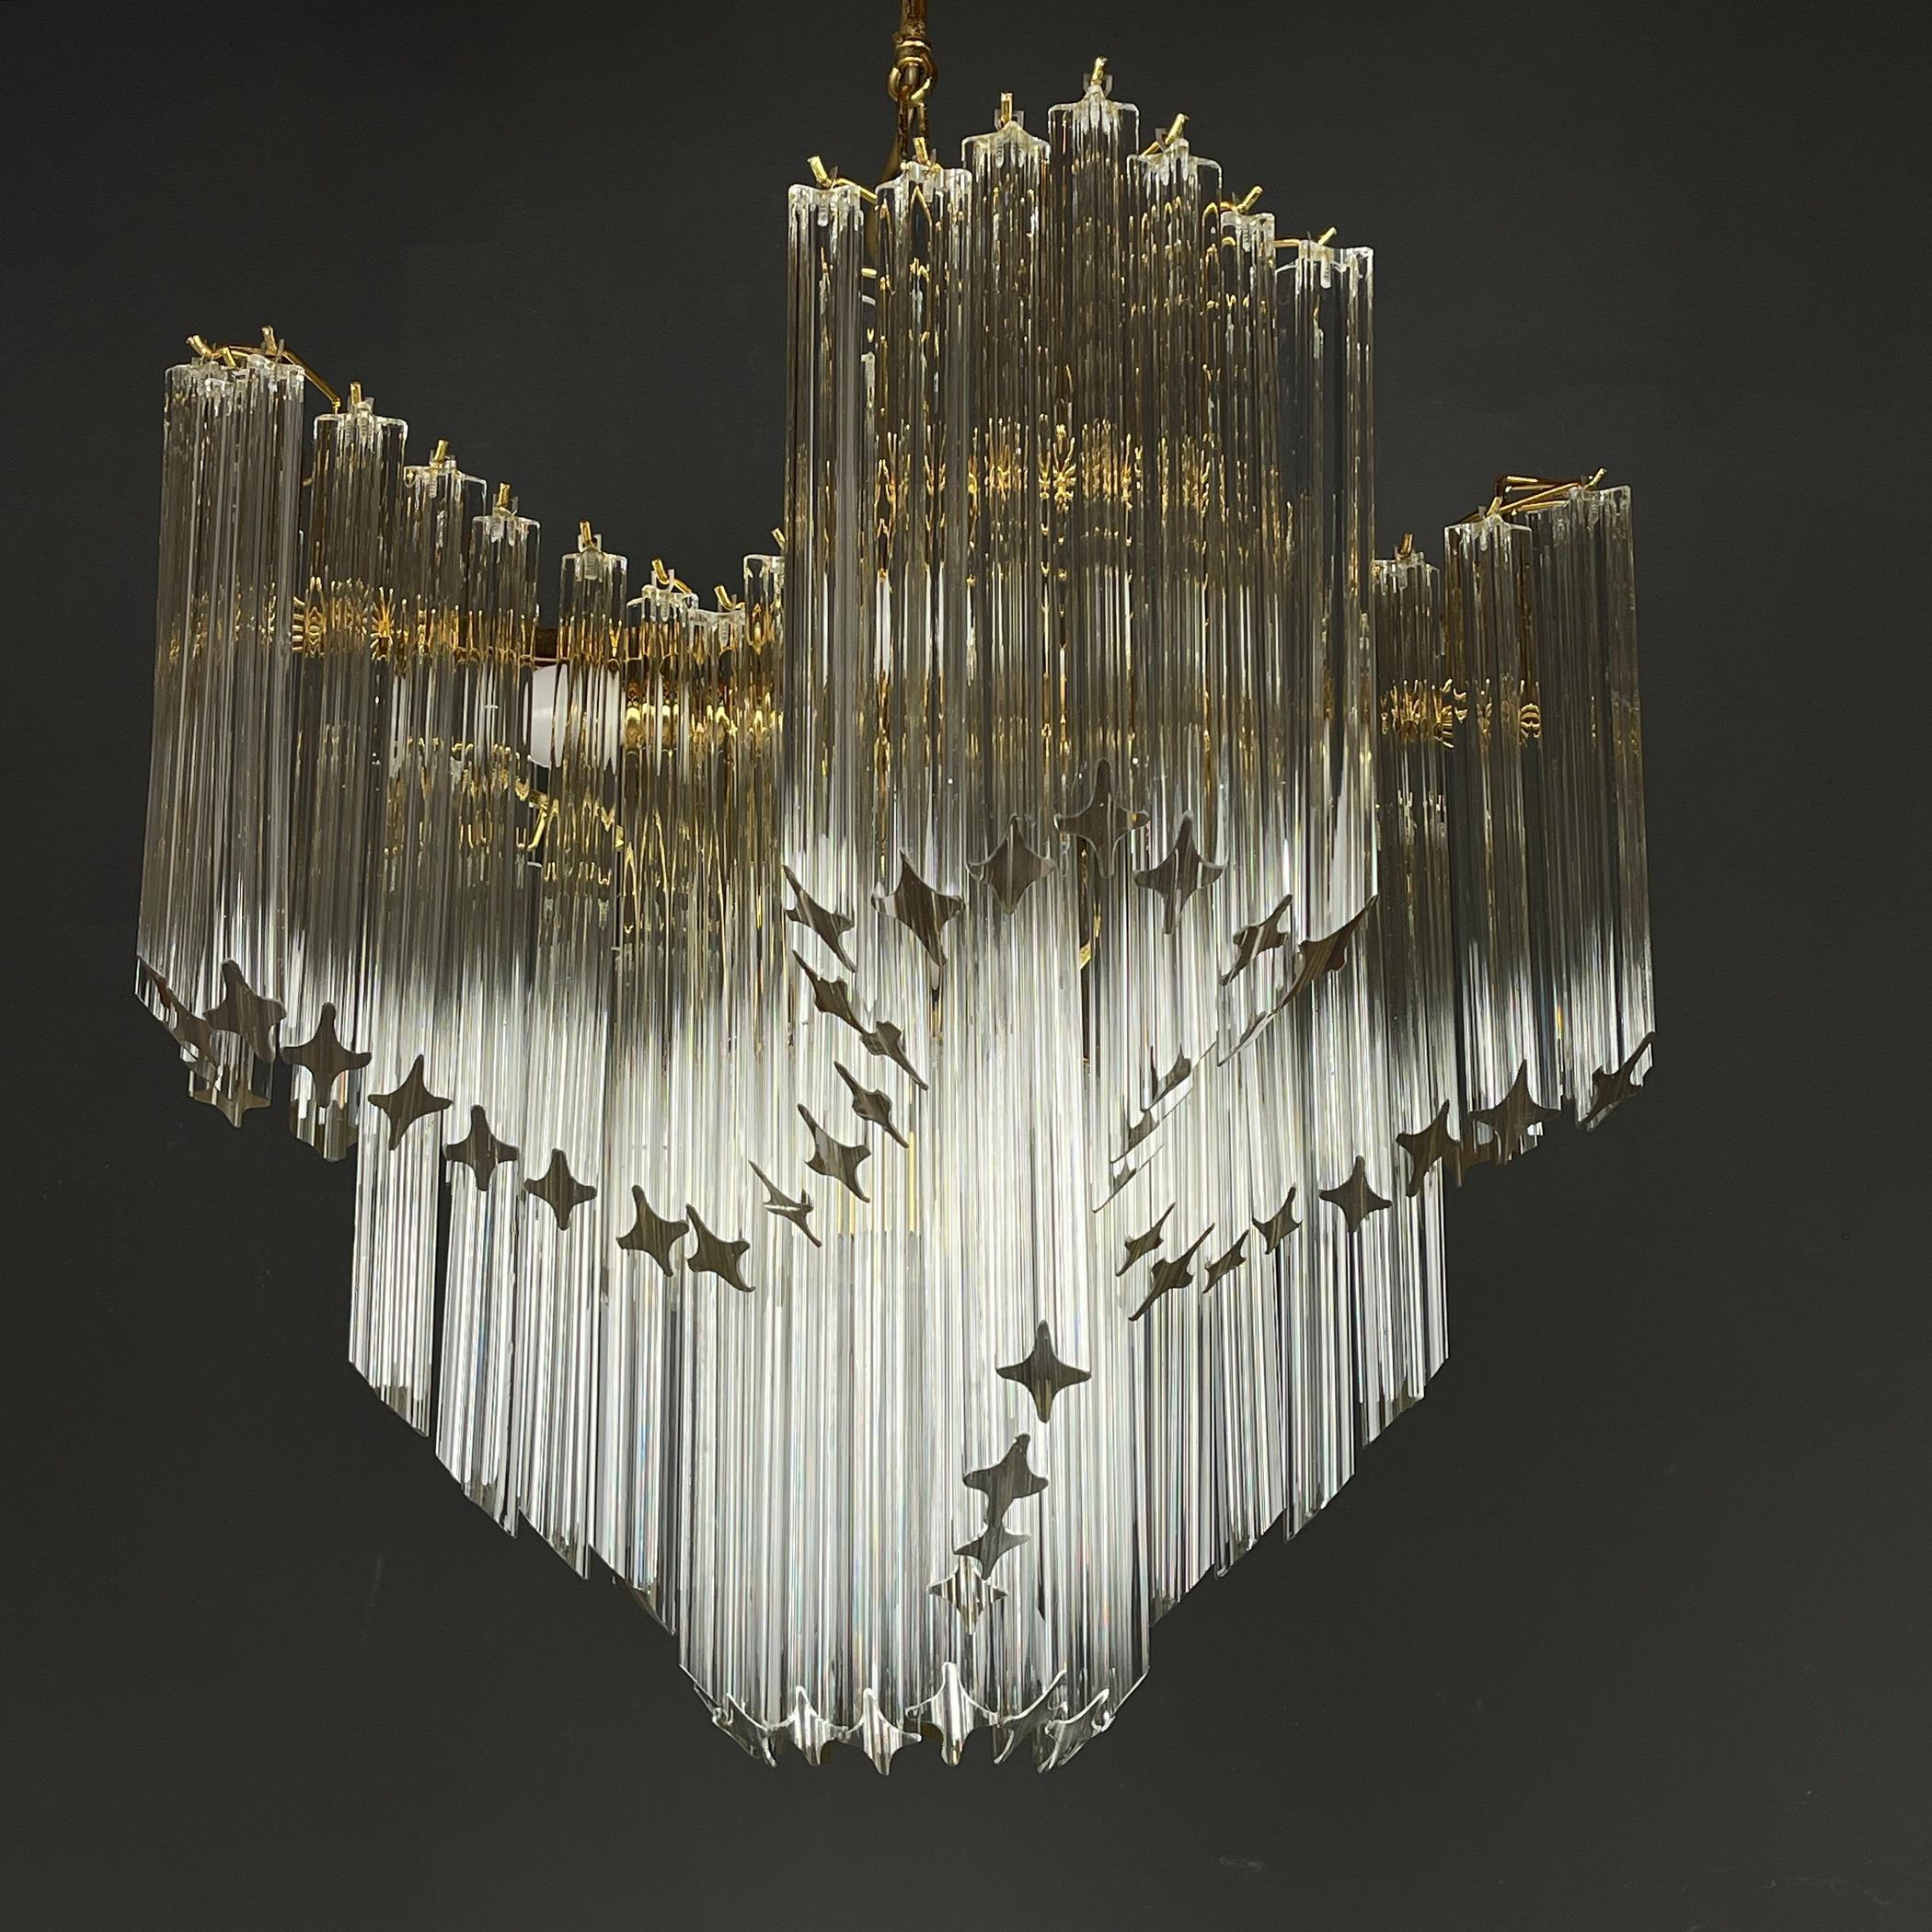 Stunning cascade chandelier made of 105 Murano glass transparent crystals by Venini. Made in Italy in the 1970s.
Venini & Co. played a leading role in the revival of Italy’s high-end glass industry, pairing innovative modernist designers with the